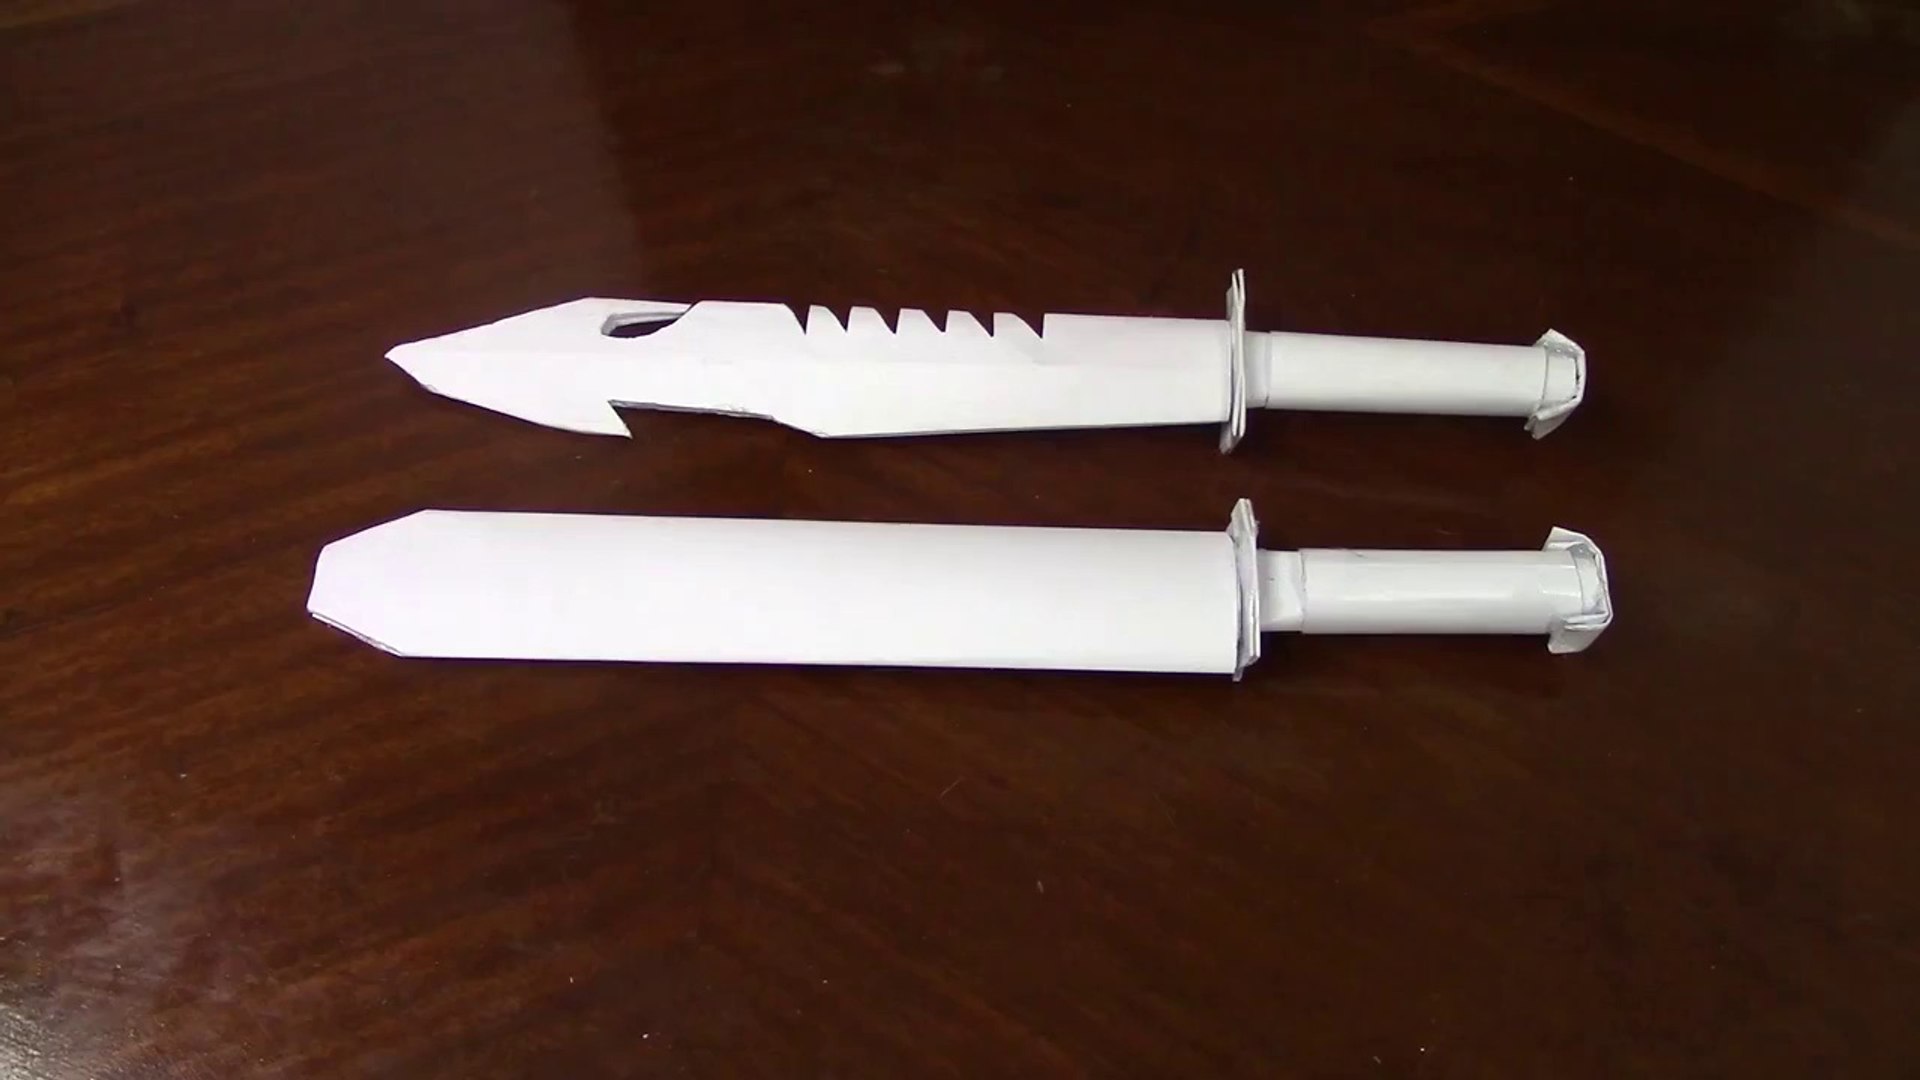 How to Make a Paper Knife Tutorial: Learn to Craft Your Own Weapon